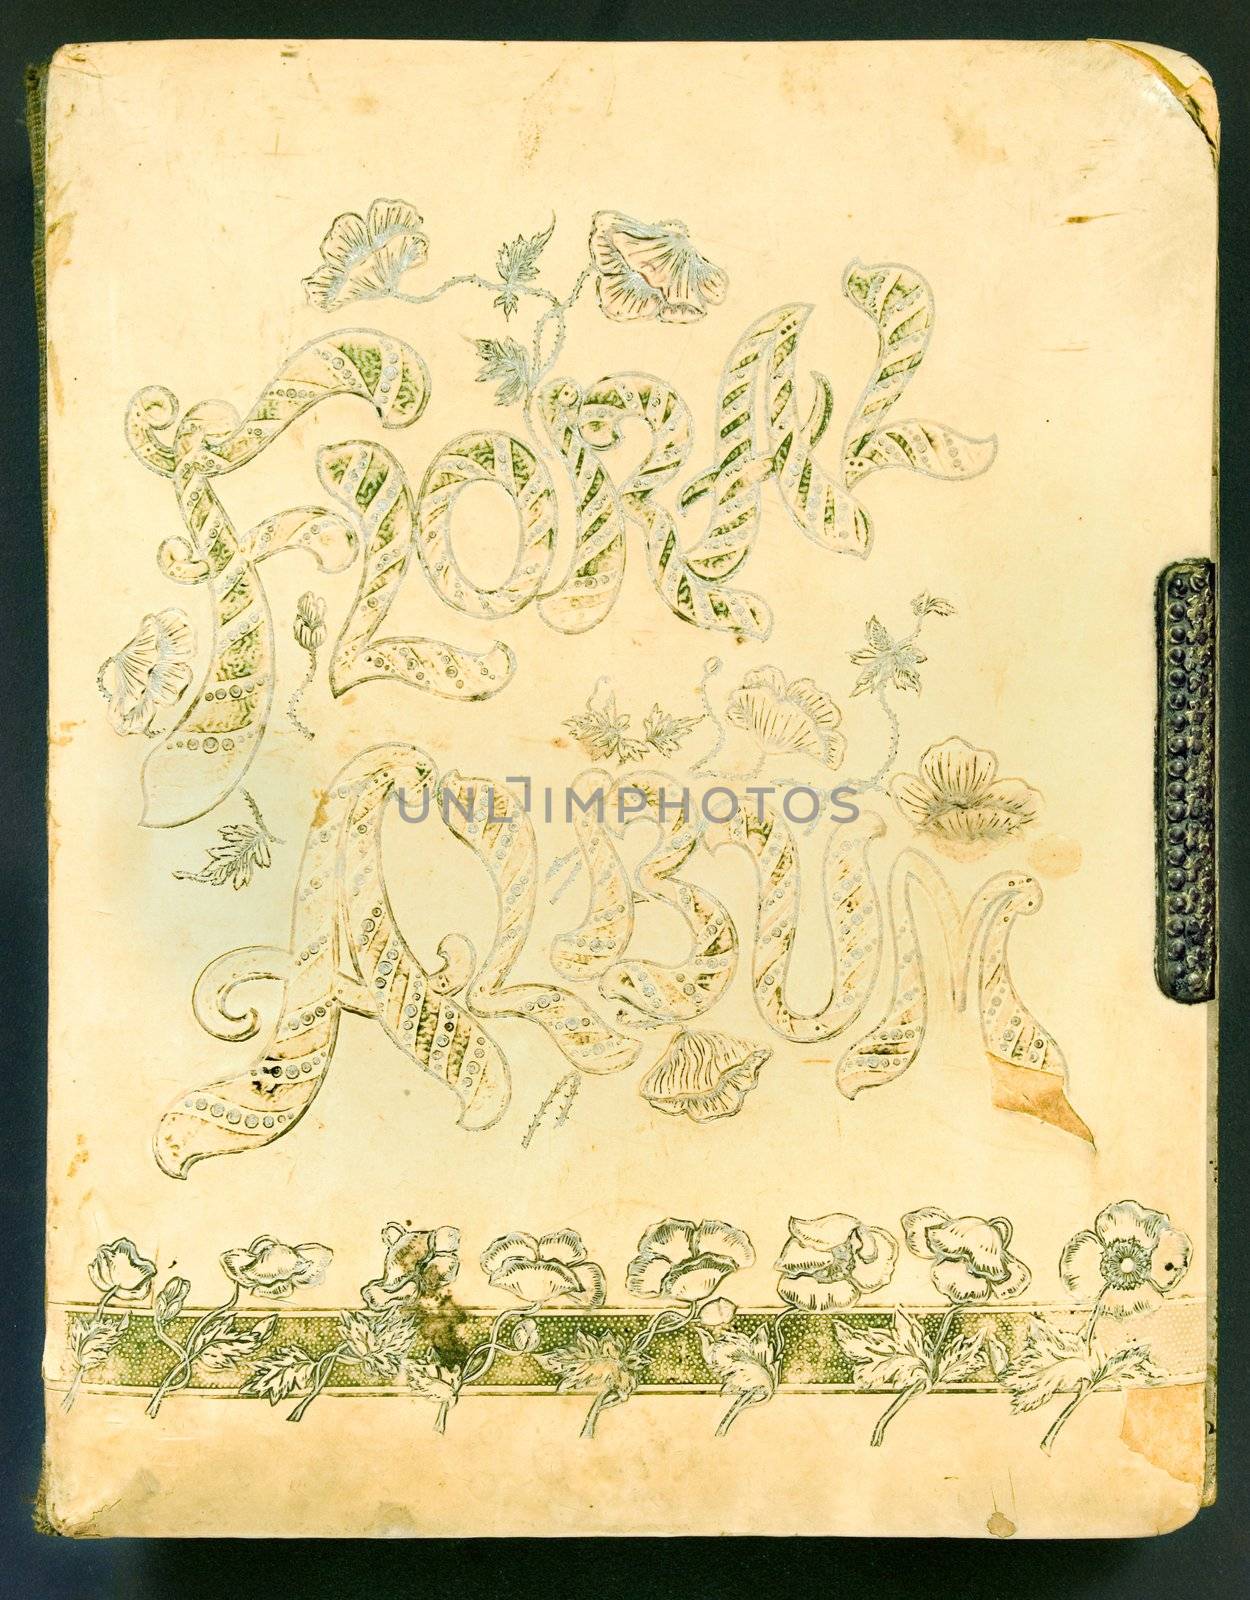 cover of a vintage photoalbum